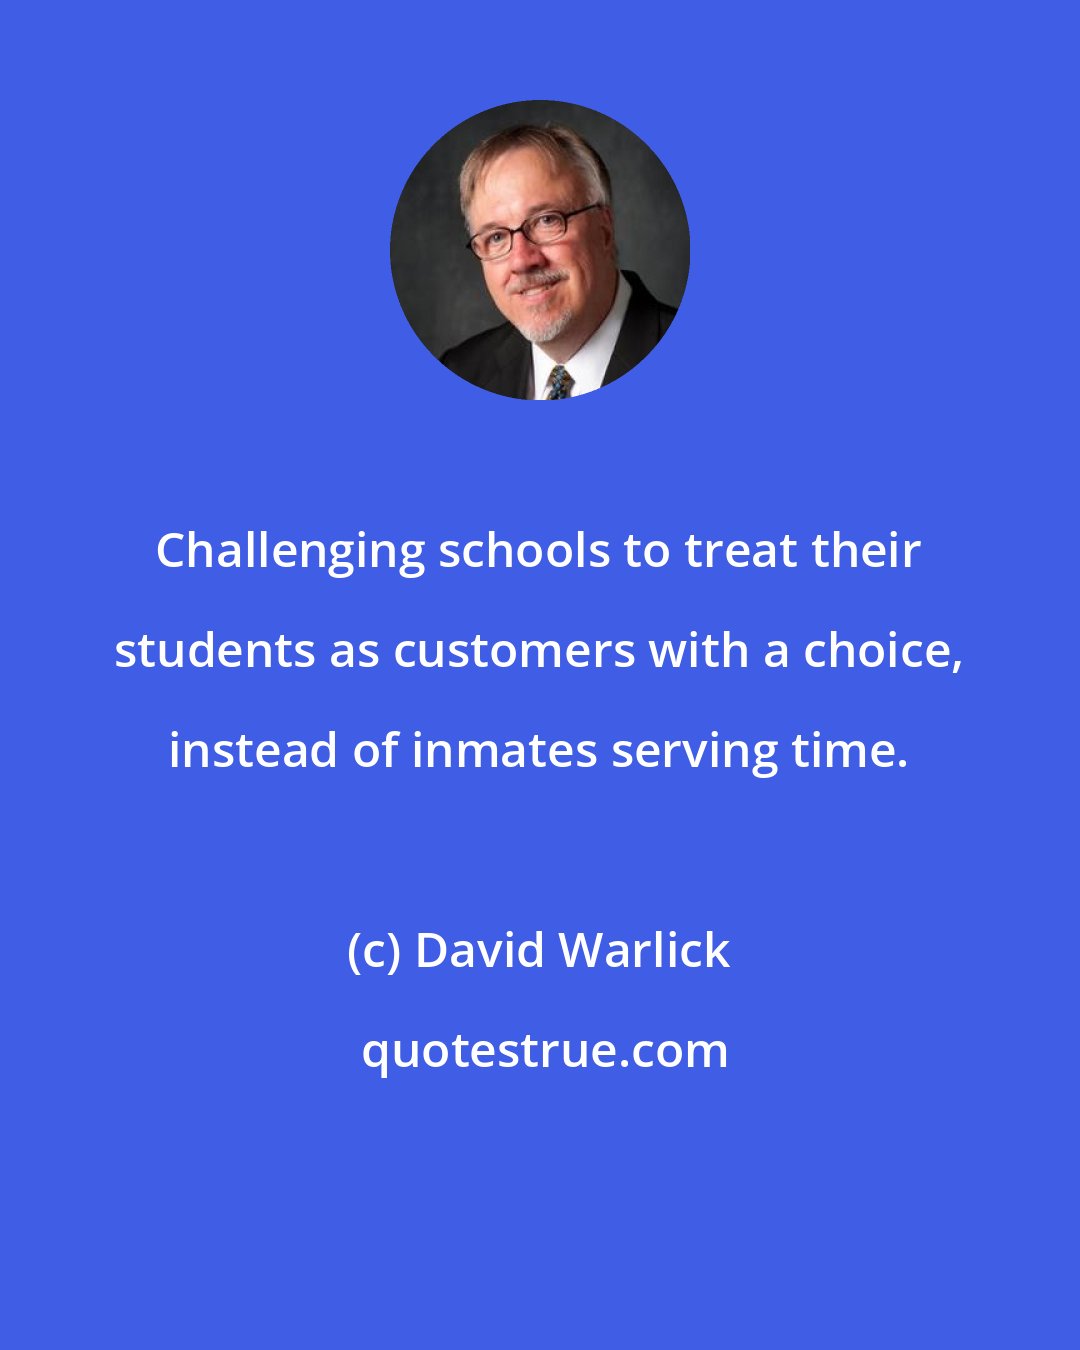 David Warlick: Challenging schools to treat their students as customers with a choice, instead of inmates serving time.